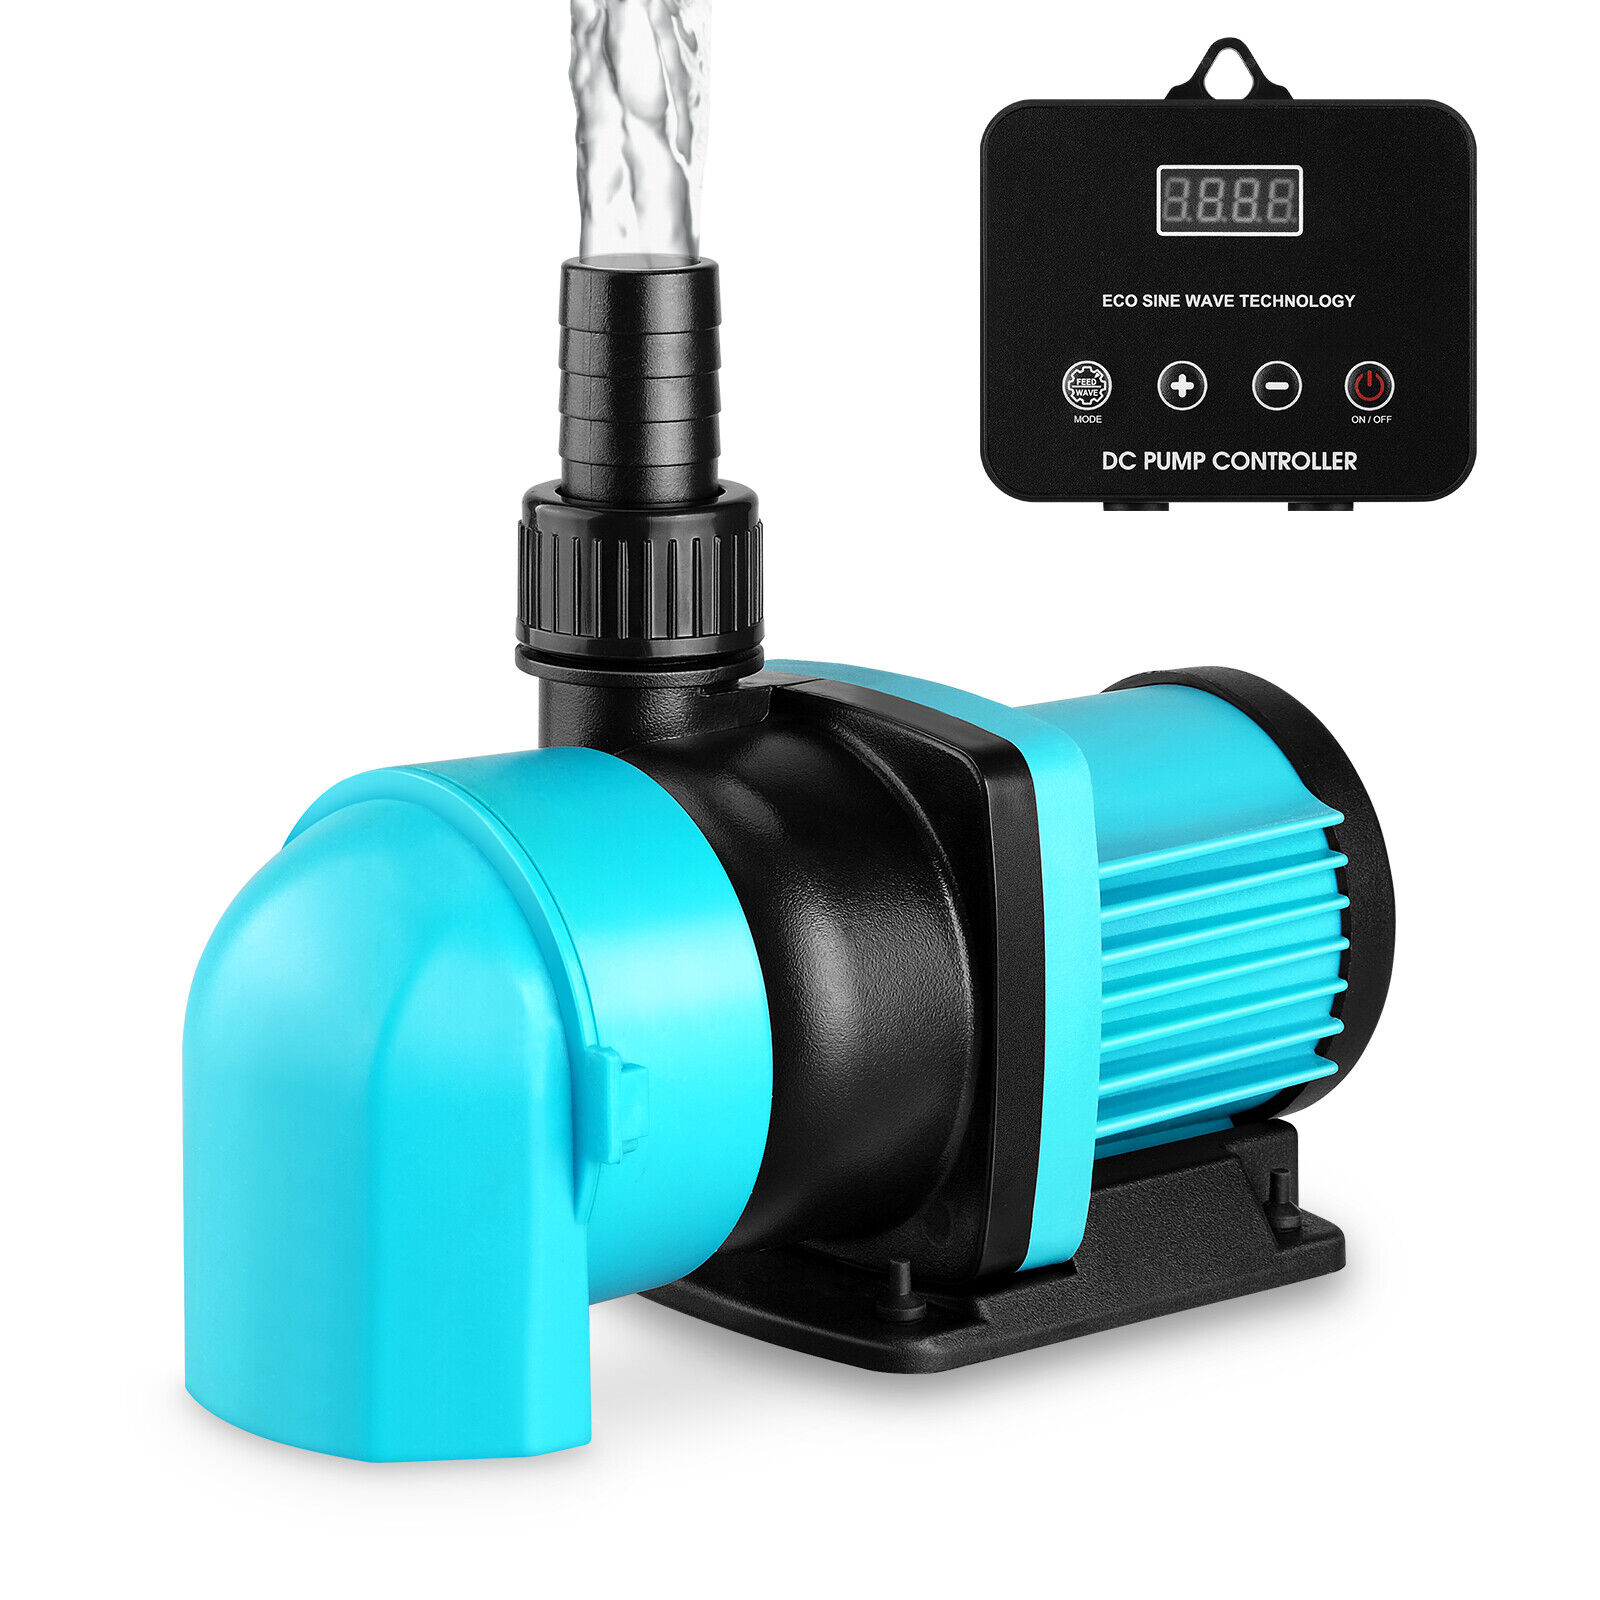 Aquarium 24V DC Water Pump with Controller , Submersible and Inline Return Pump 